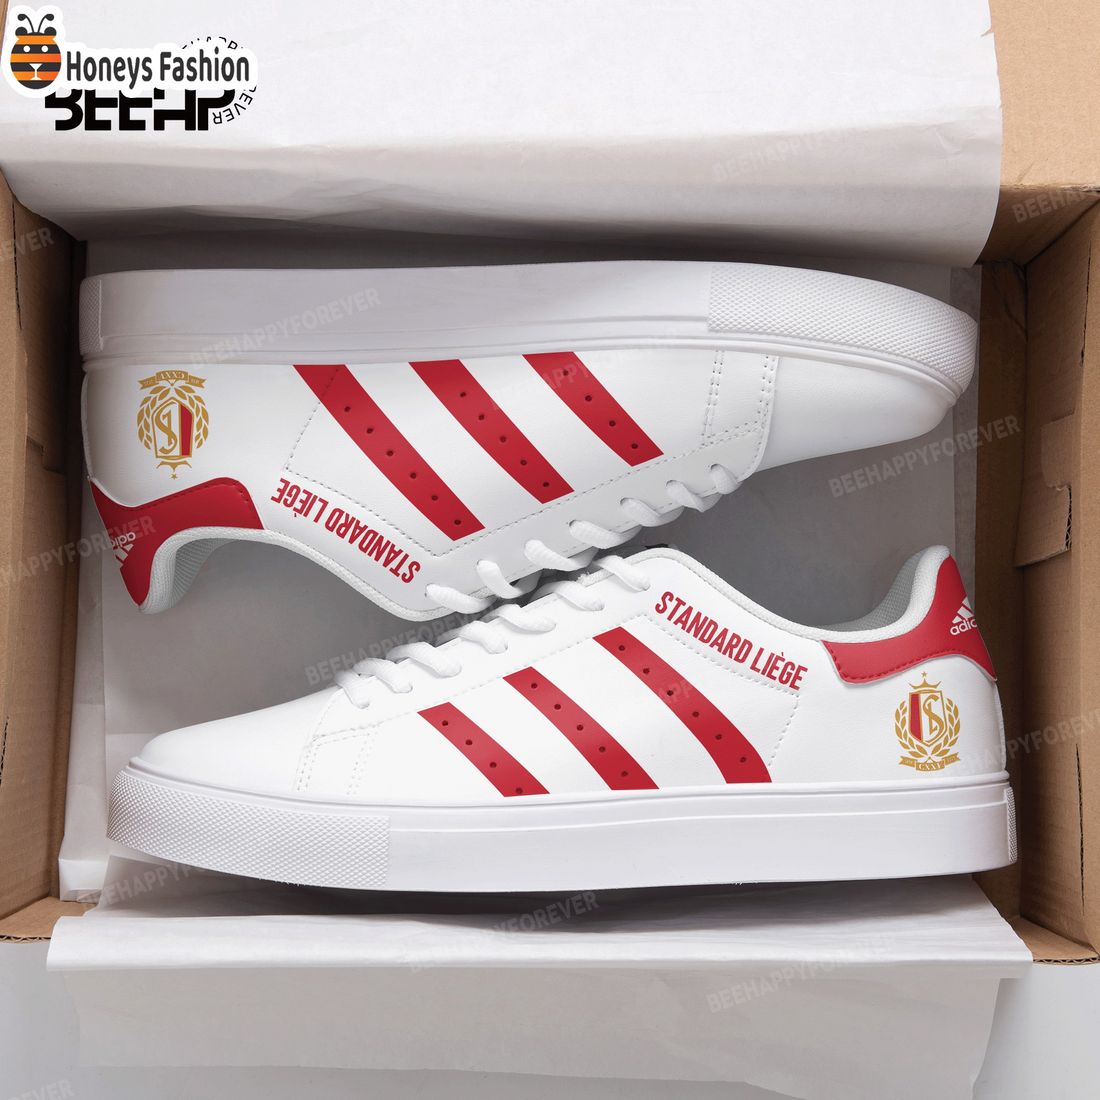 Standard Liege Stan Smith Adidas Shoes